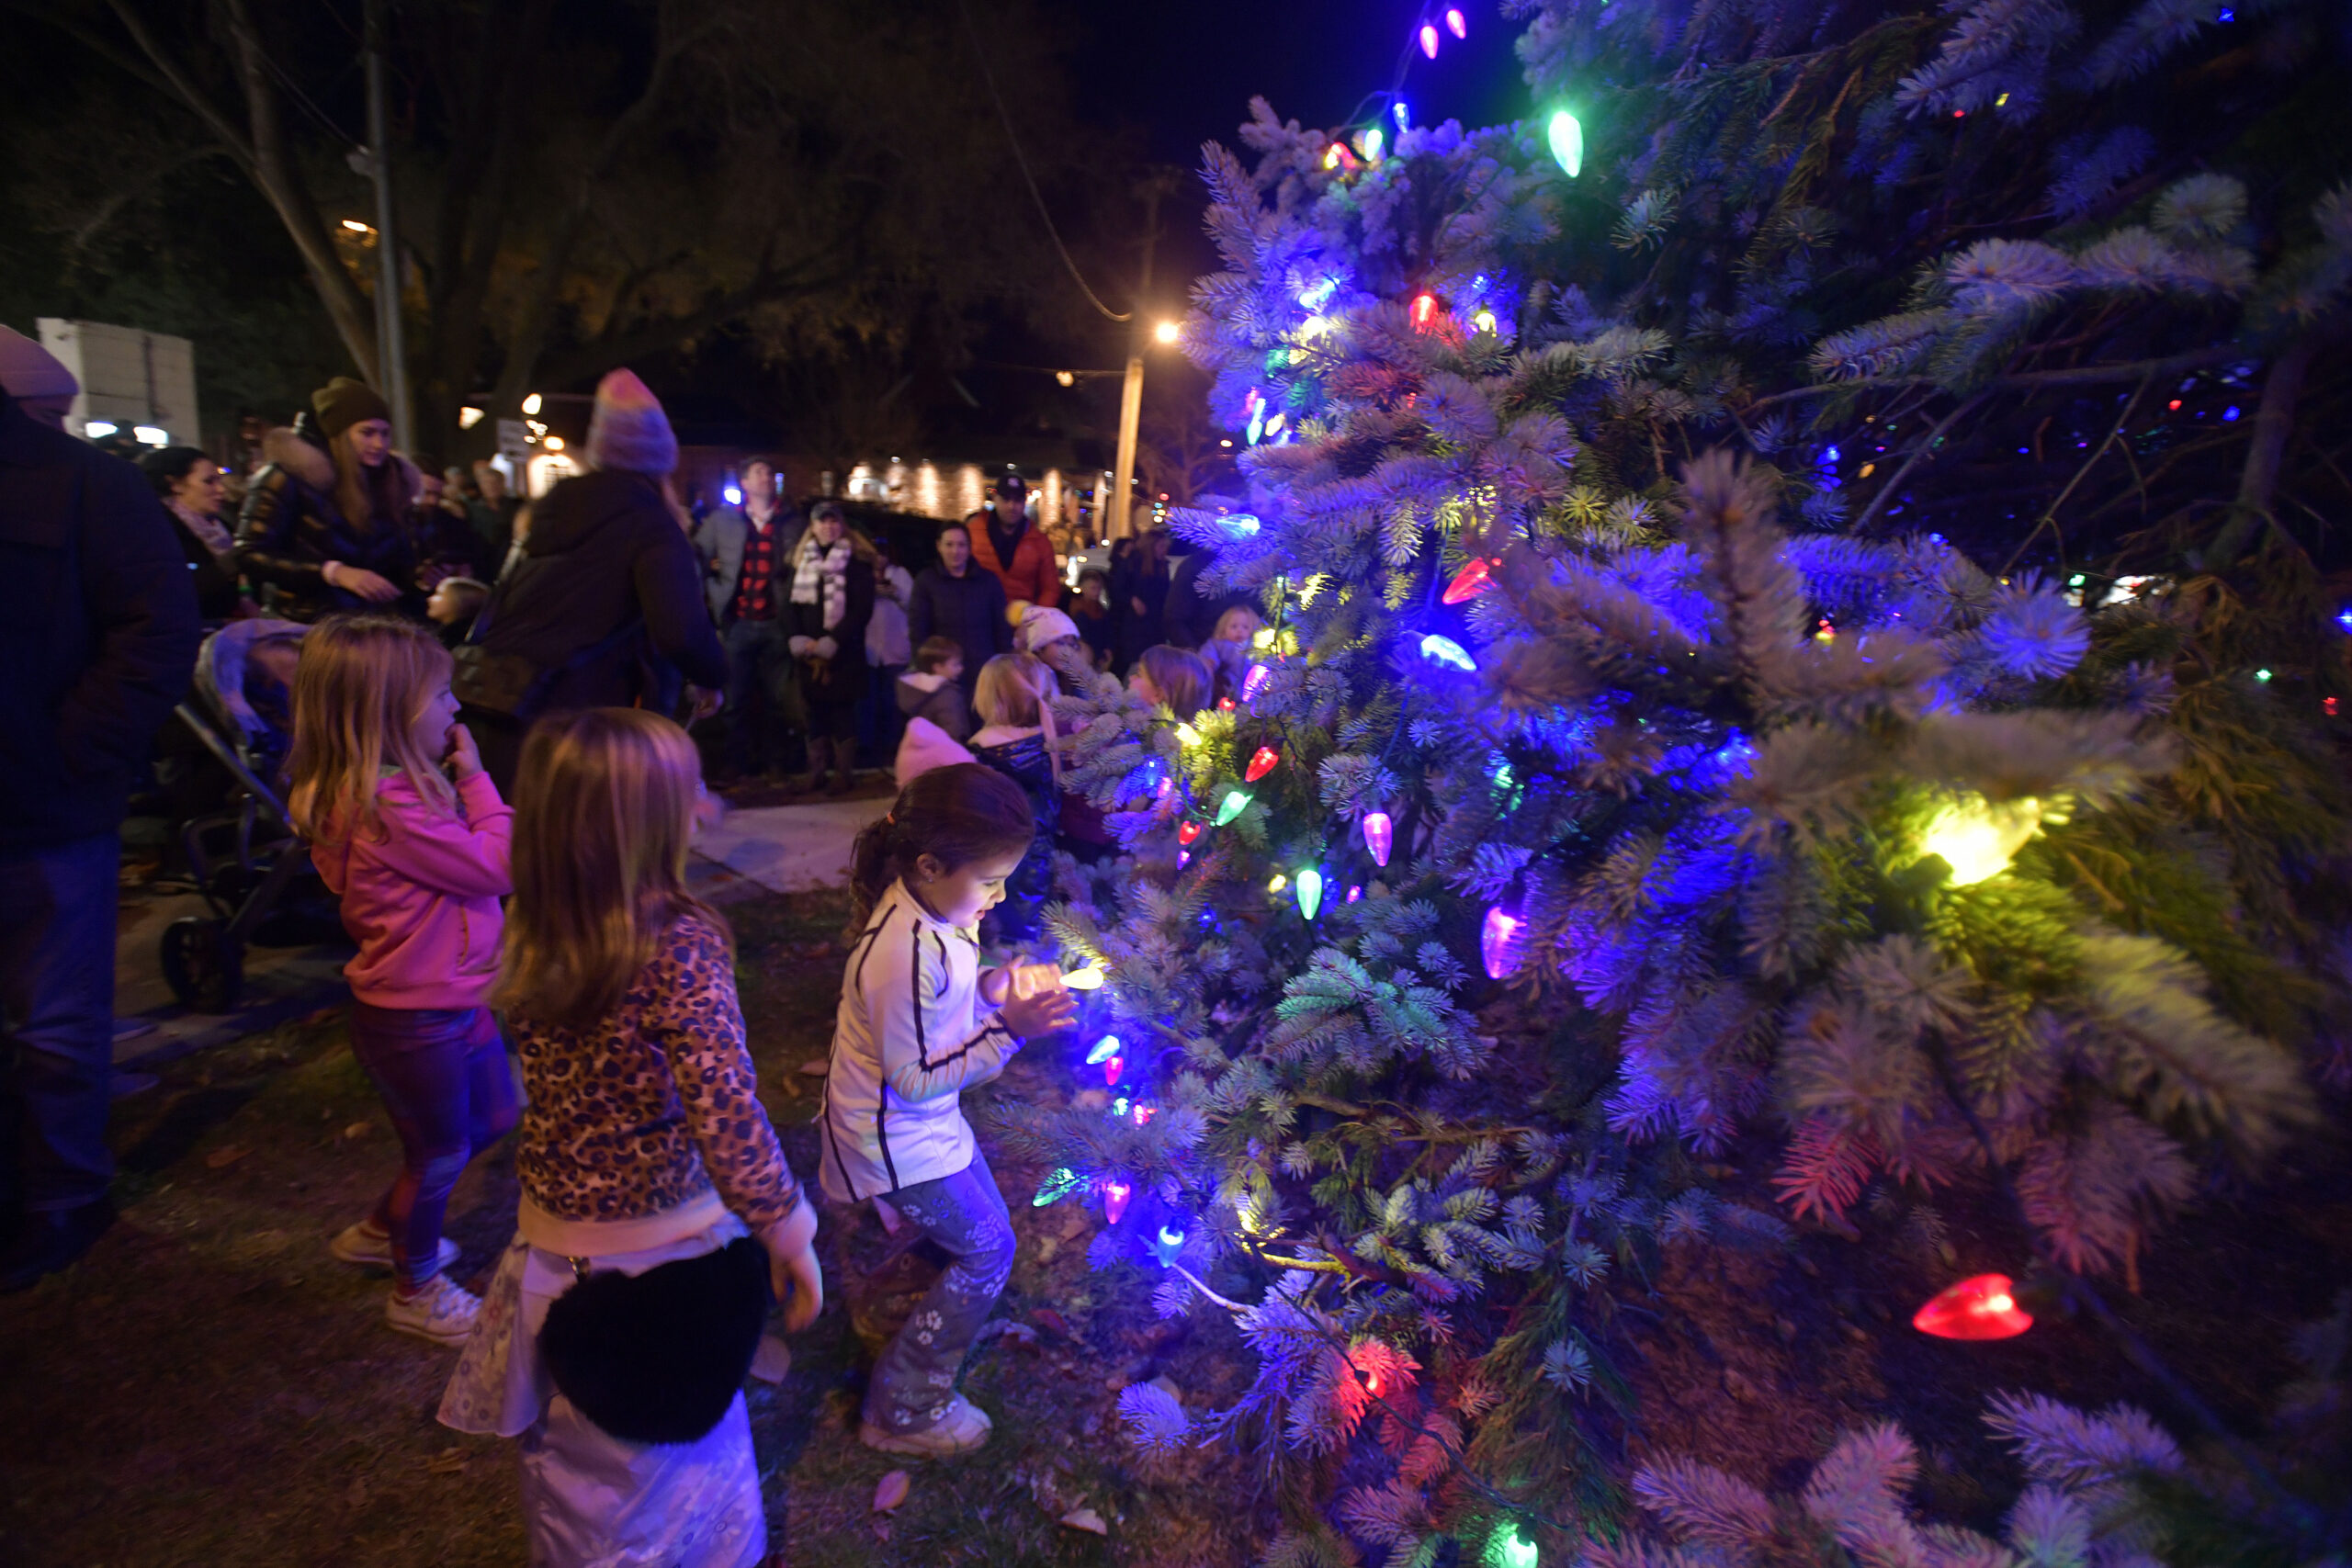 The tree is lighted in Sag Harbor on Friday.